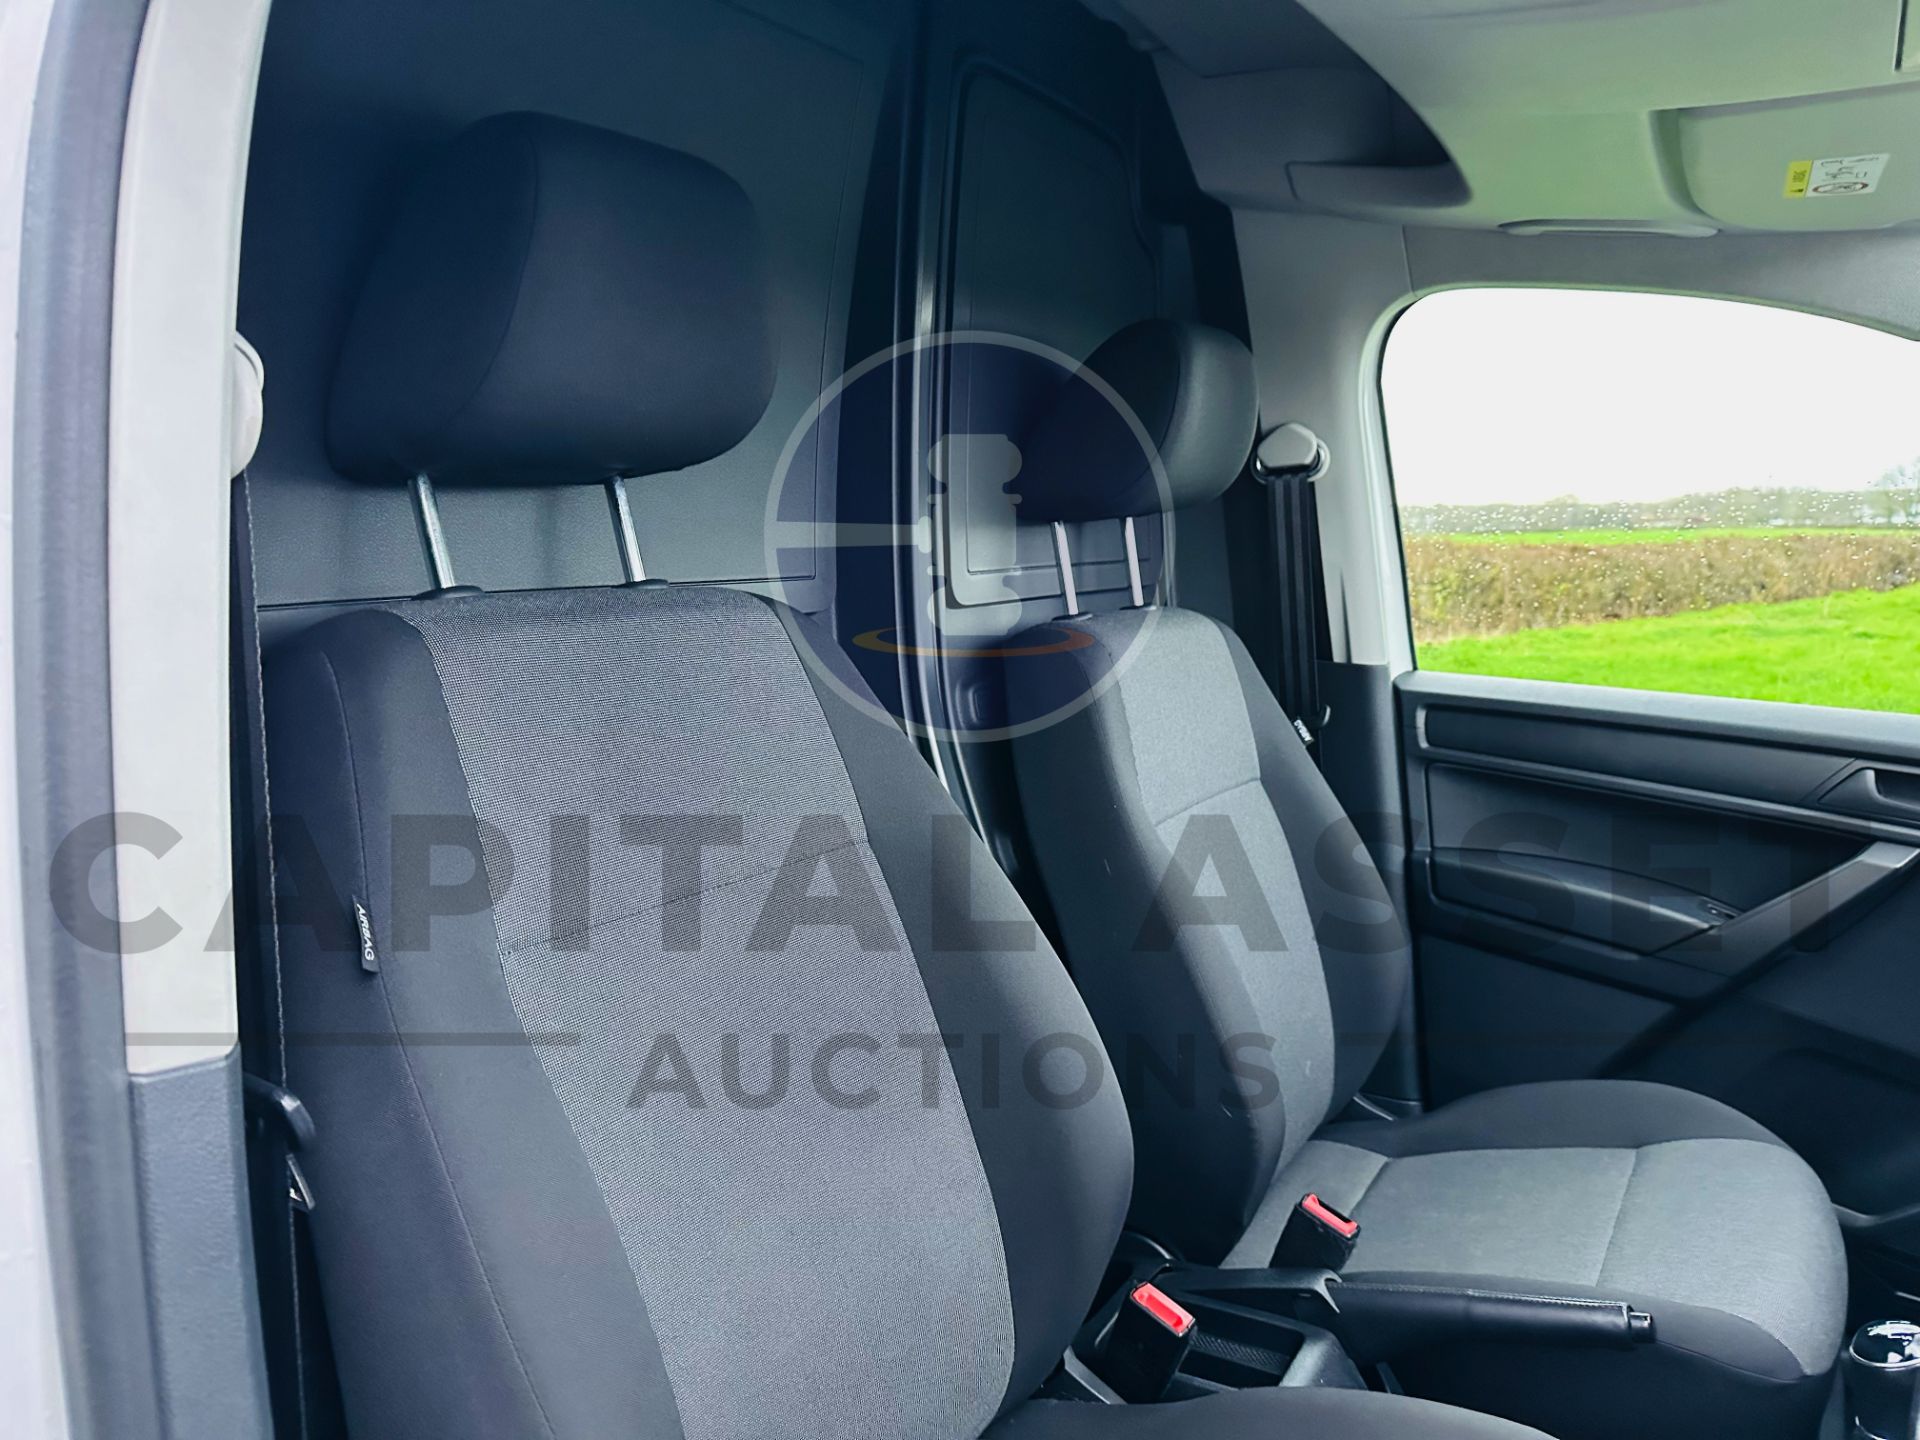 VOLKSWAGEN CADDY 2.0TDI BMT TREND-LINE (2021 MODEL) MAXI / LWB-1 OWNER (AIR CON) EURO 6 - Image 19 of 31